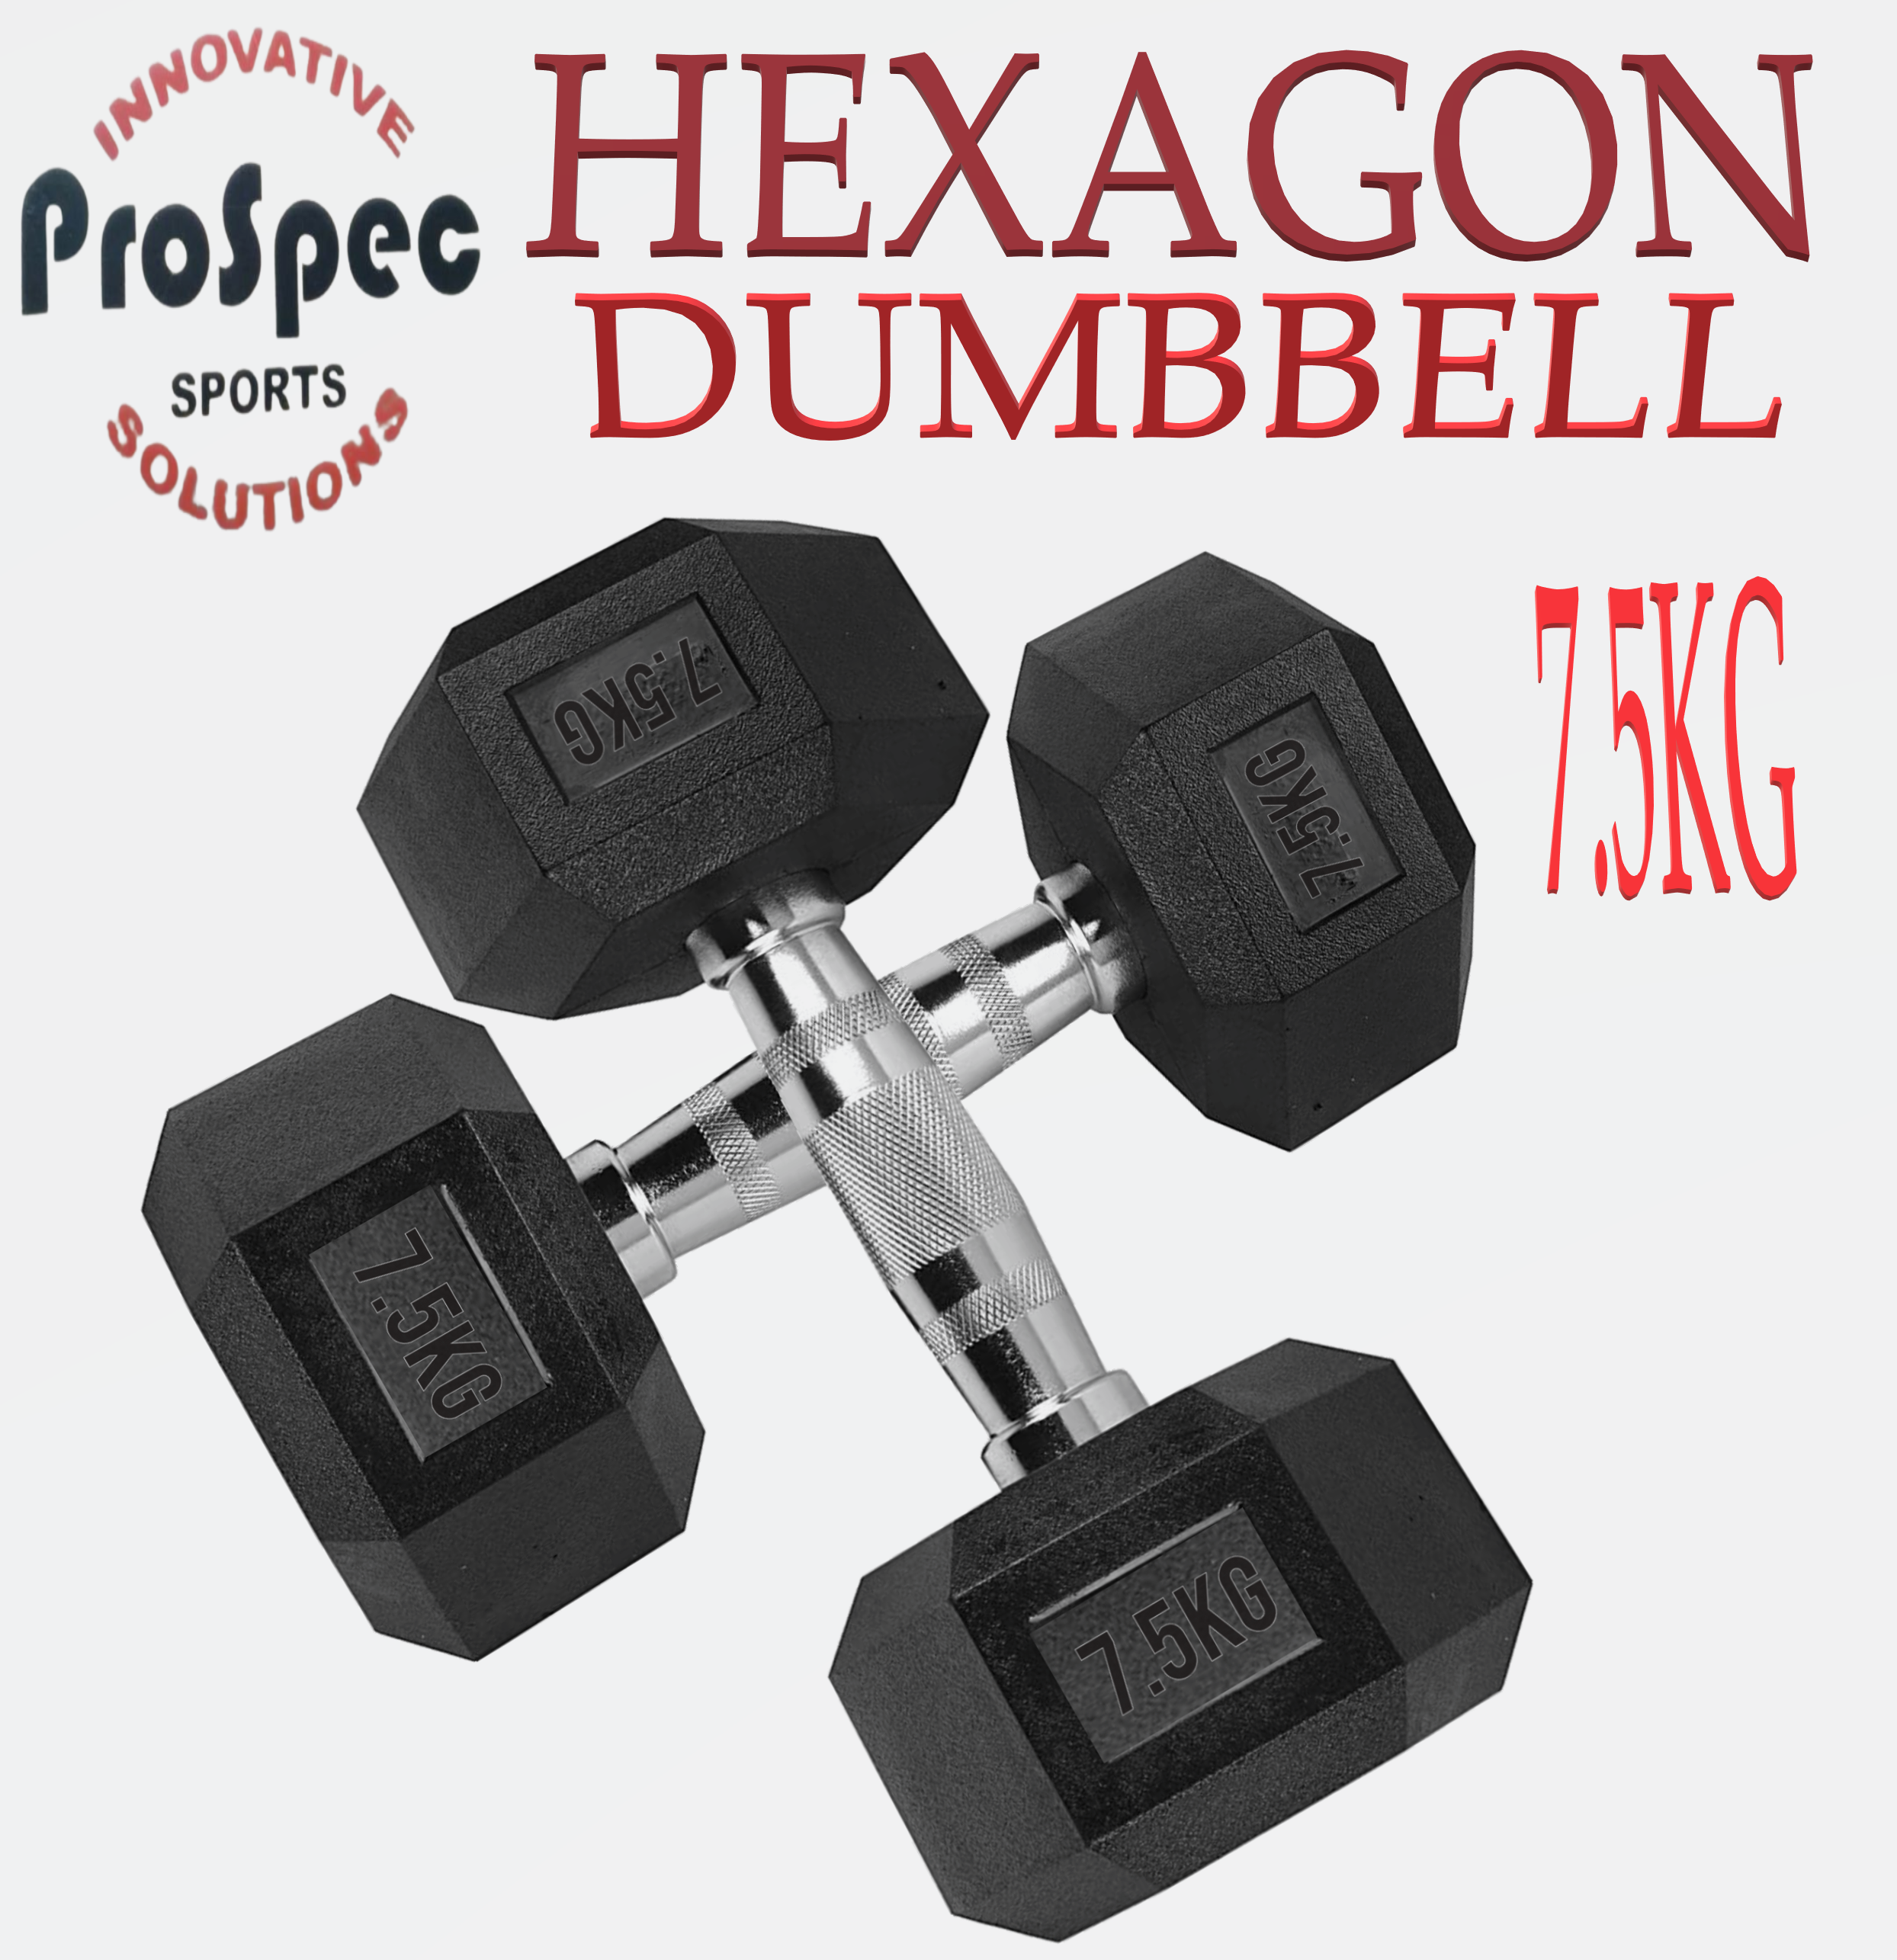 RUBX Rubber Coated Professional Exercise Hex Dumbbells (Pack of Two) 7.5 Kg  x 2pc (Total = 15 kg) Rs. 1730 